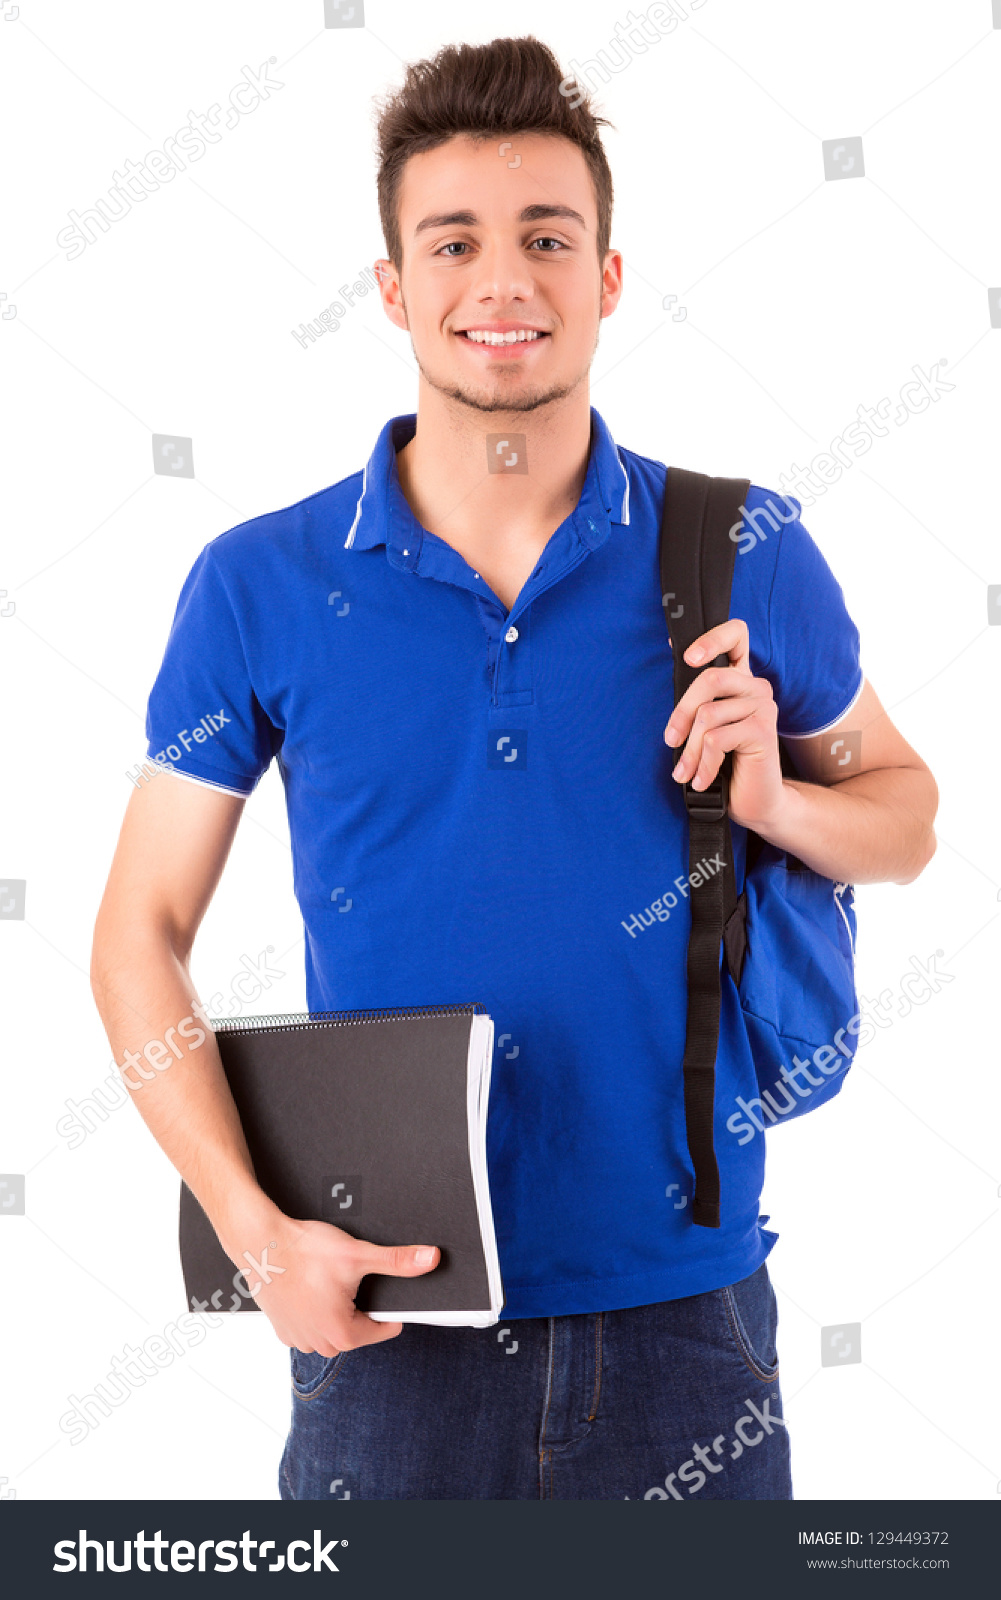 Young happy student posing isolated over white background #129449372